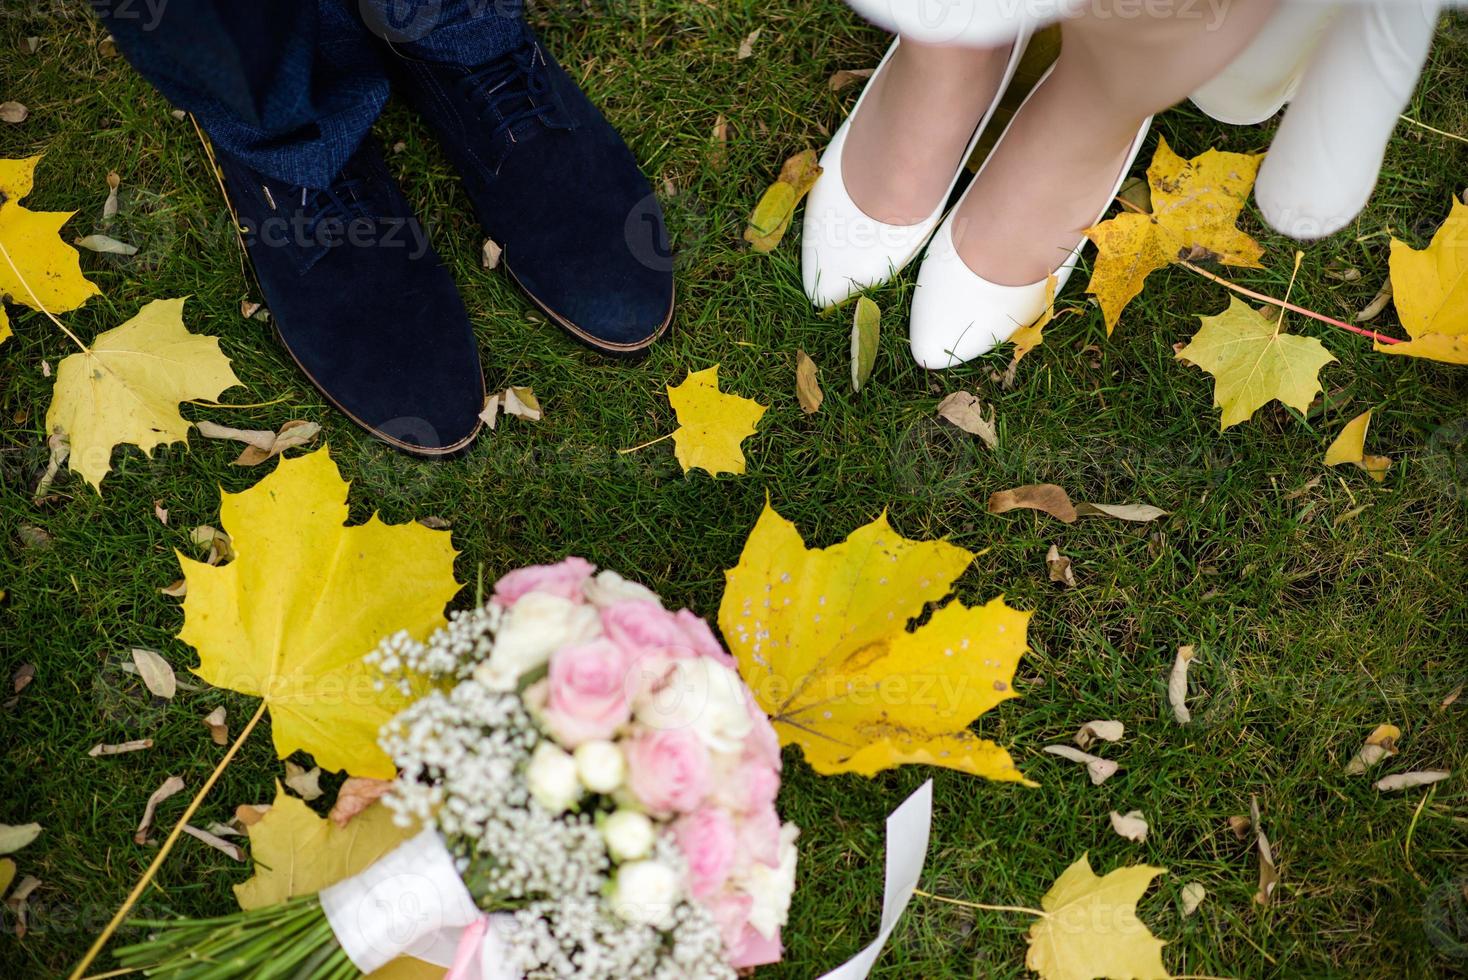 foots of bride and groom . The bride and groom holding on hands and walking on road in the nature. Outdoors. Down view at shoes. photo